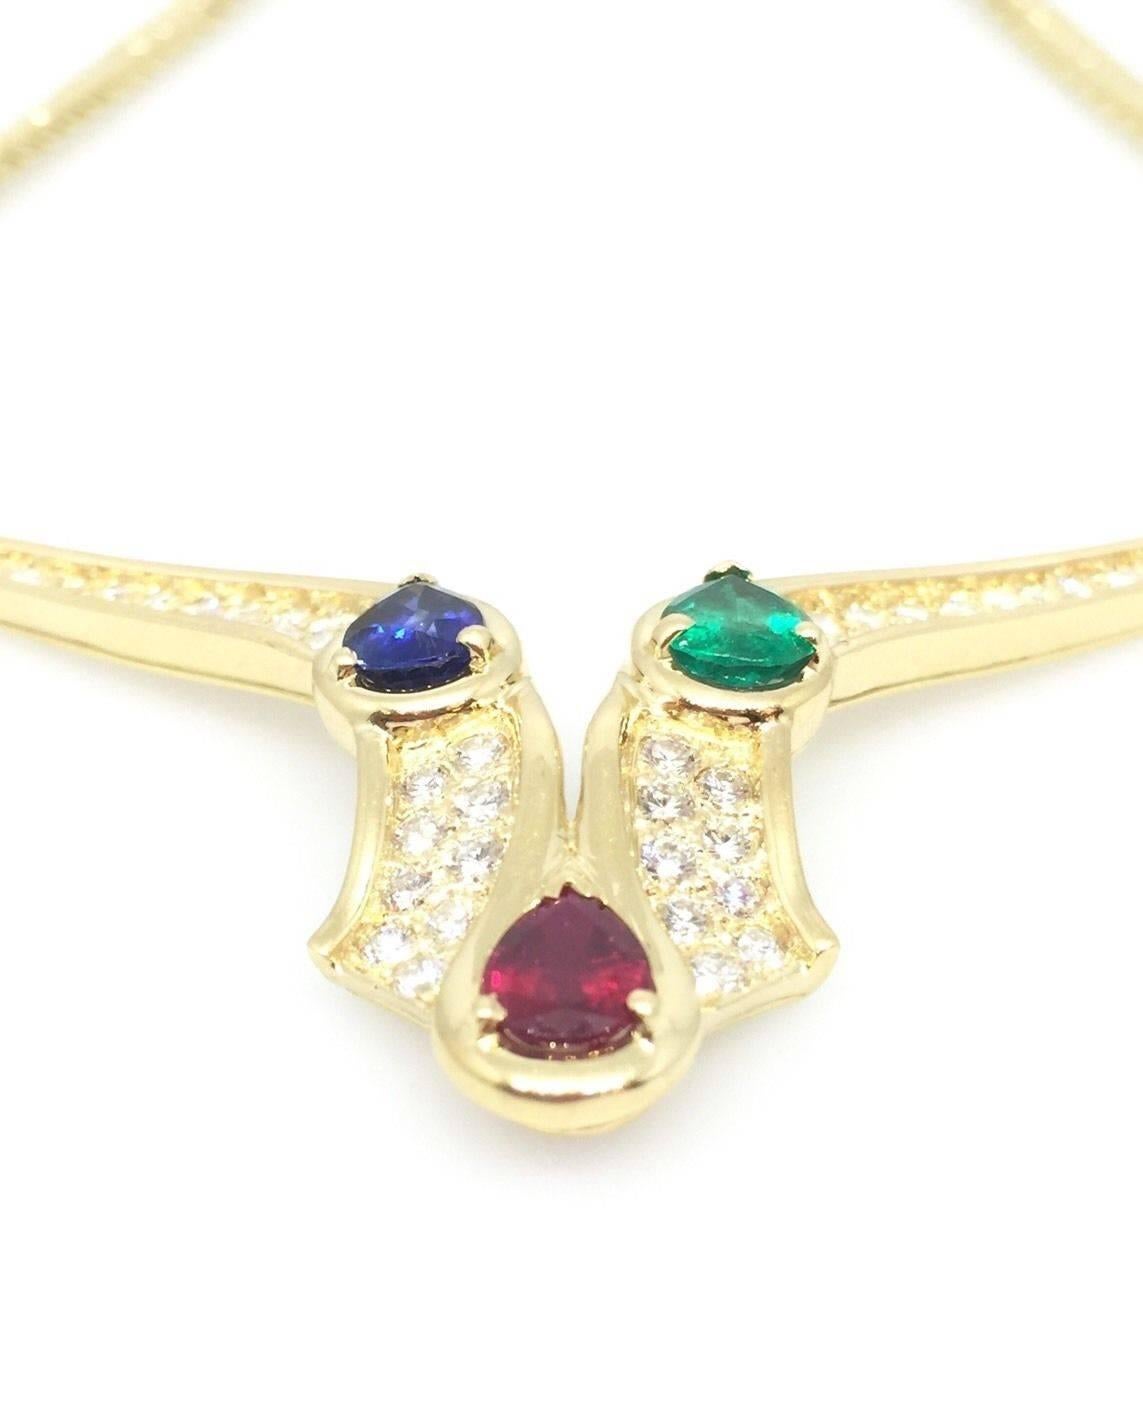 Vintage MAUBOUSSIN necklace in 18k yellow gold featuring 3 high quality pear-shaped Sapphire, Emerald and Ruby weighing approx 1.00 ct each, and approx 2.00 cts of round brilliant cut diamonds, H color, VS clarity.

Beautifully crafted 18k yellow